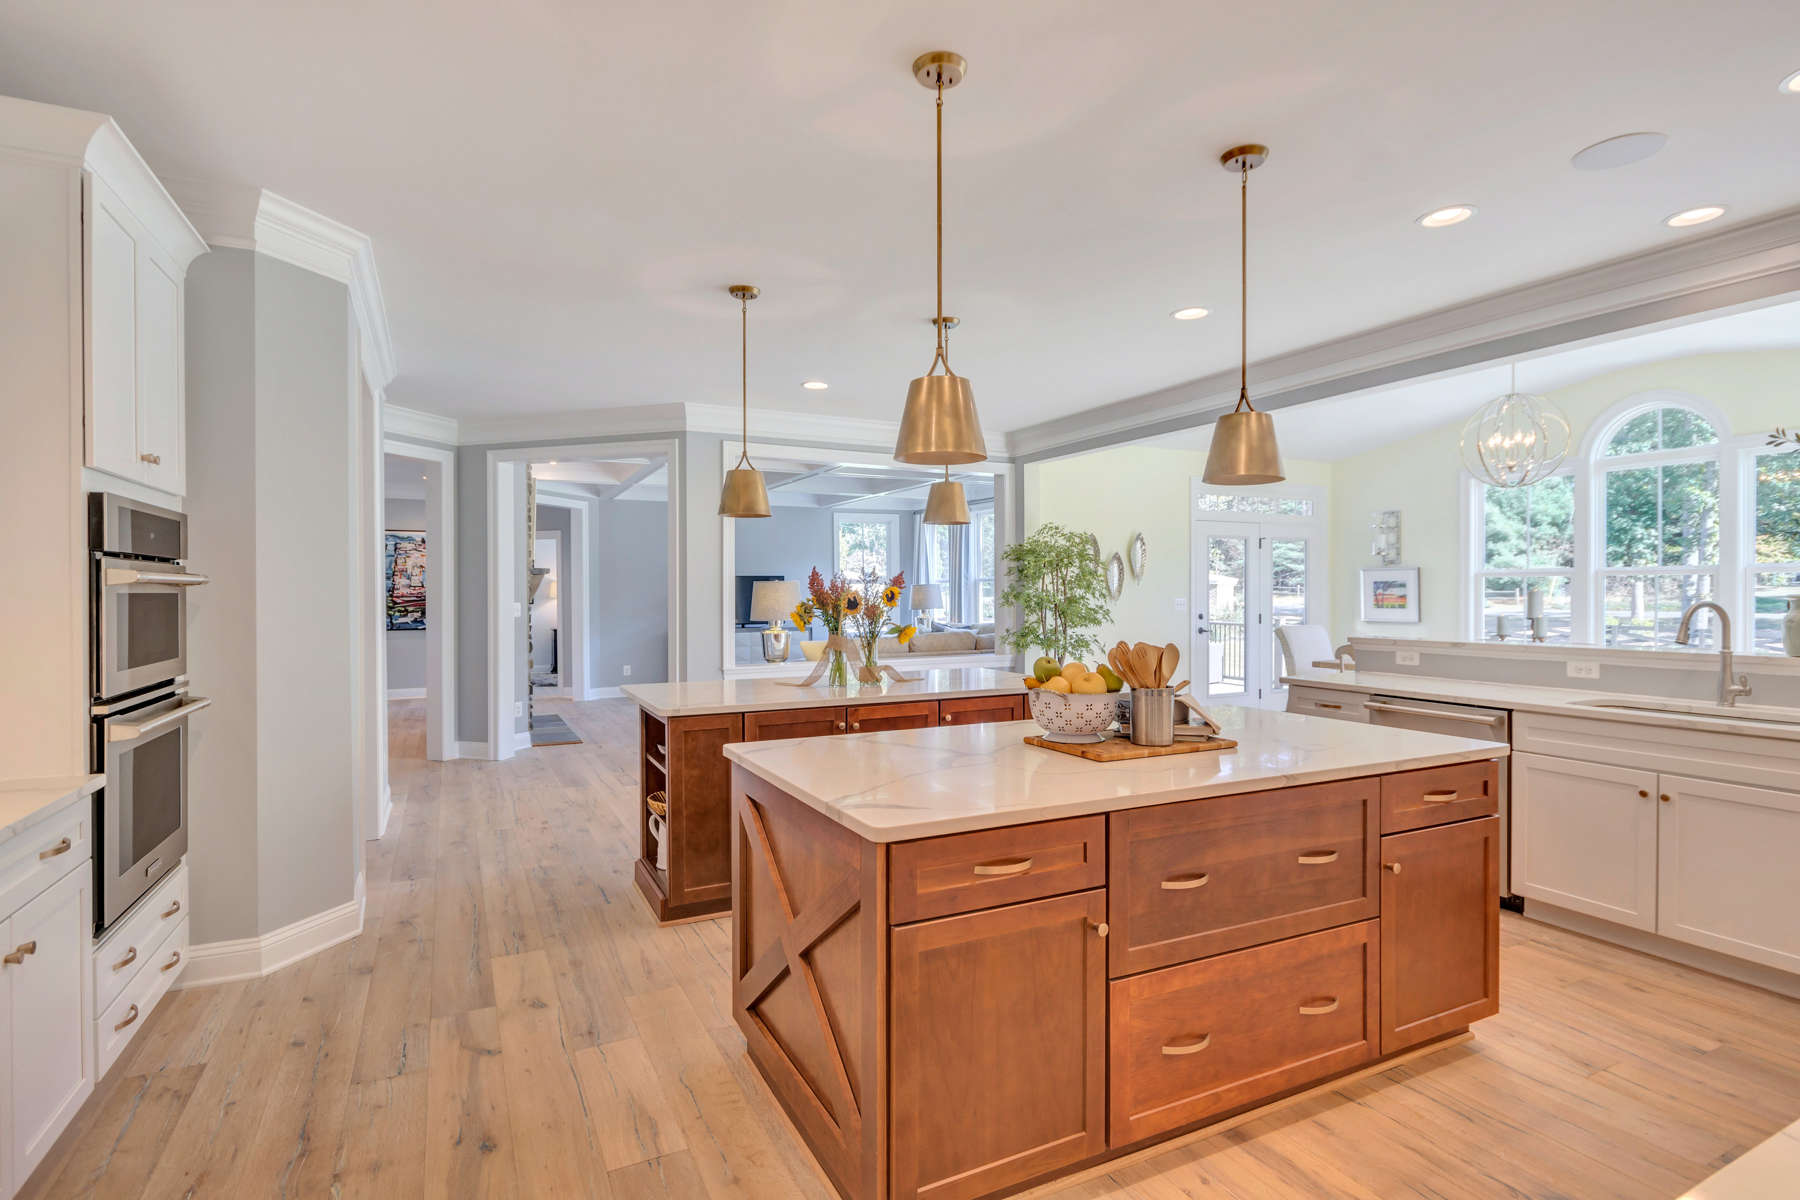 Build a new home on your lot in Virginia and Maryland | Colton Model from Stanley Martin Custom Home